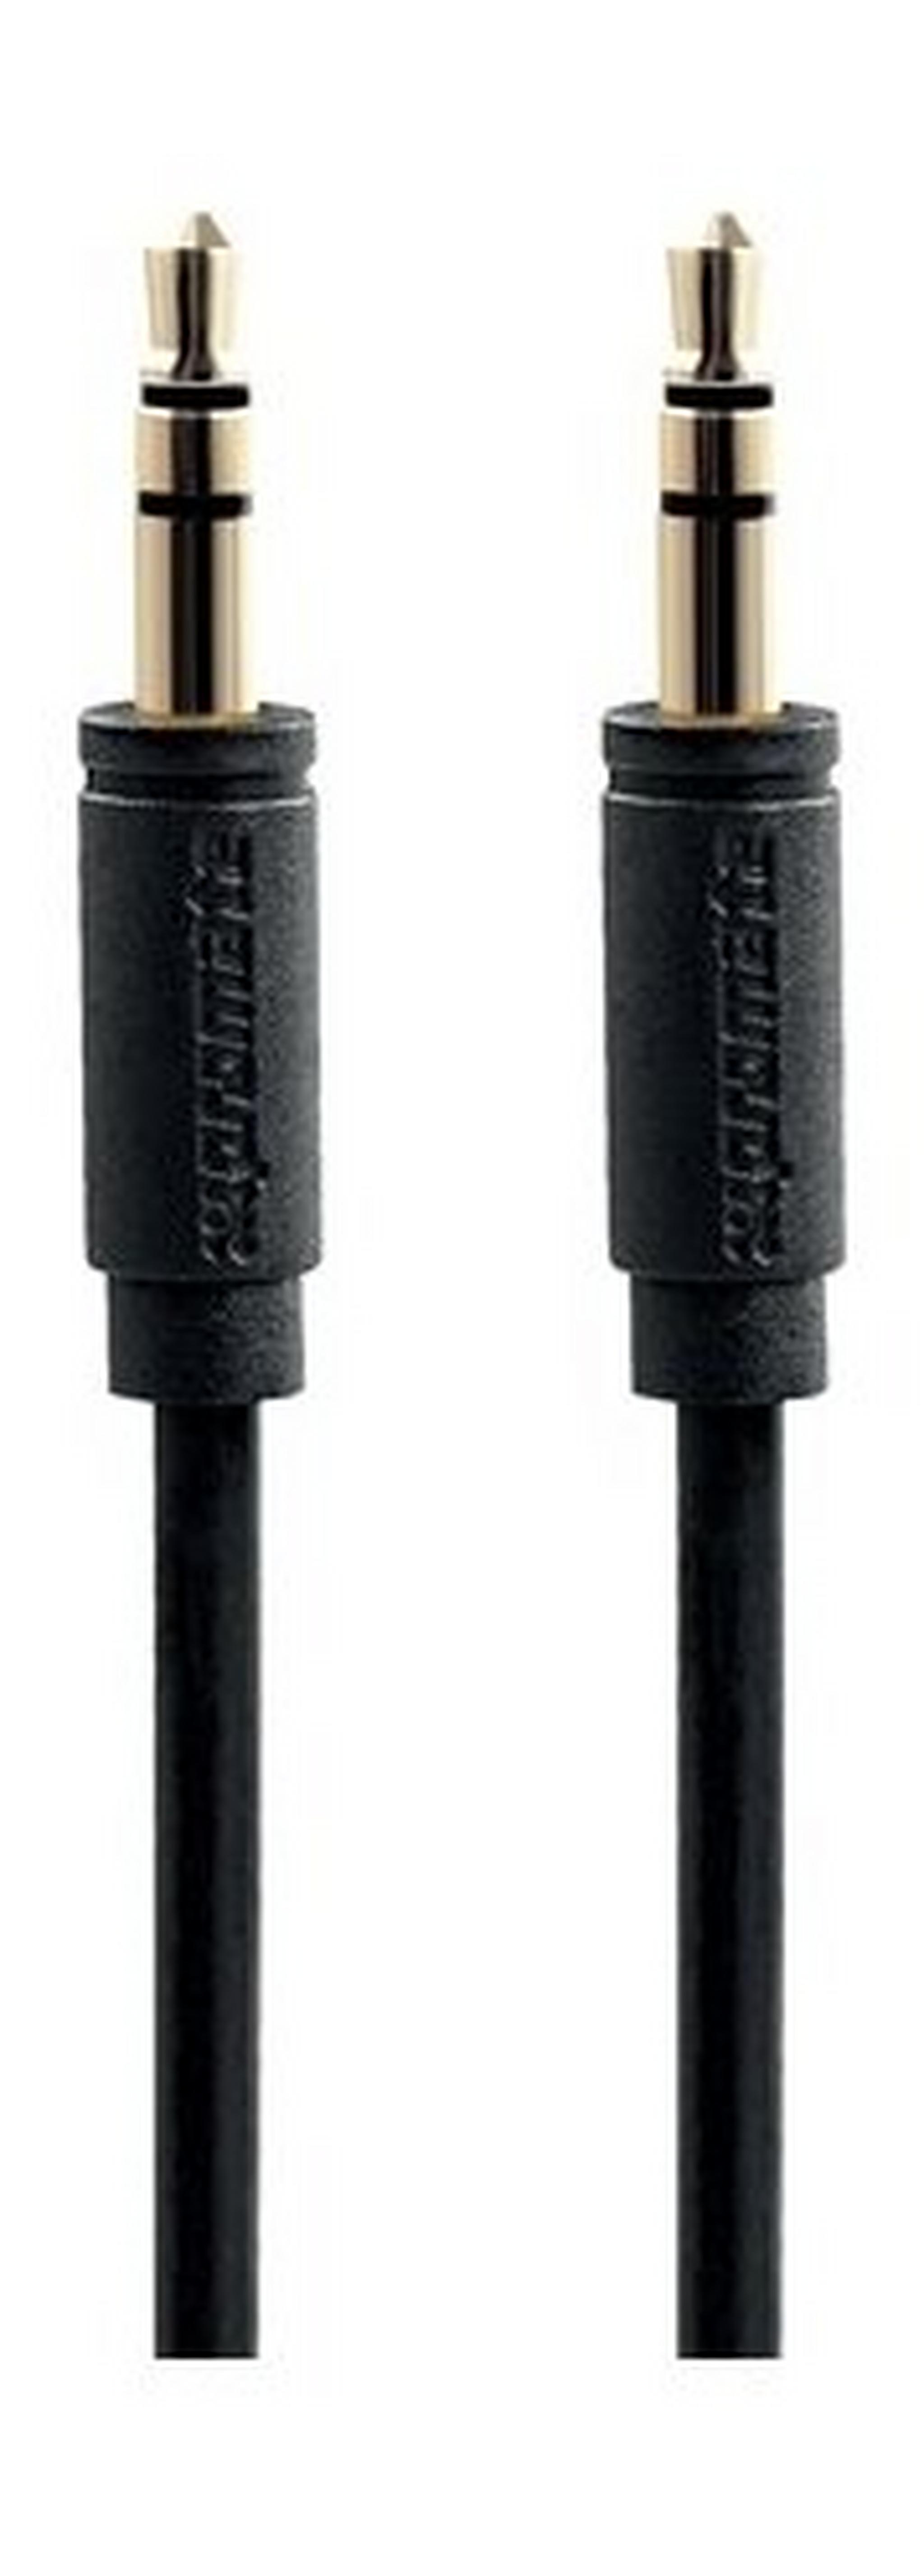 Promate linkMate 3.5mm AUX Cable 3Mtrs Black